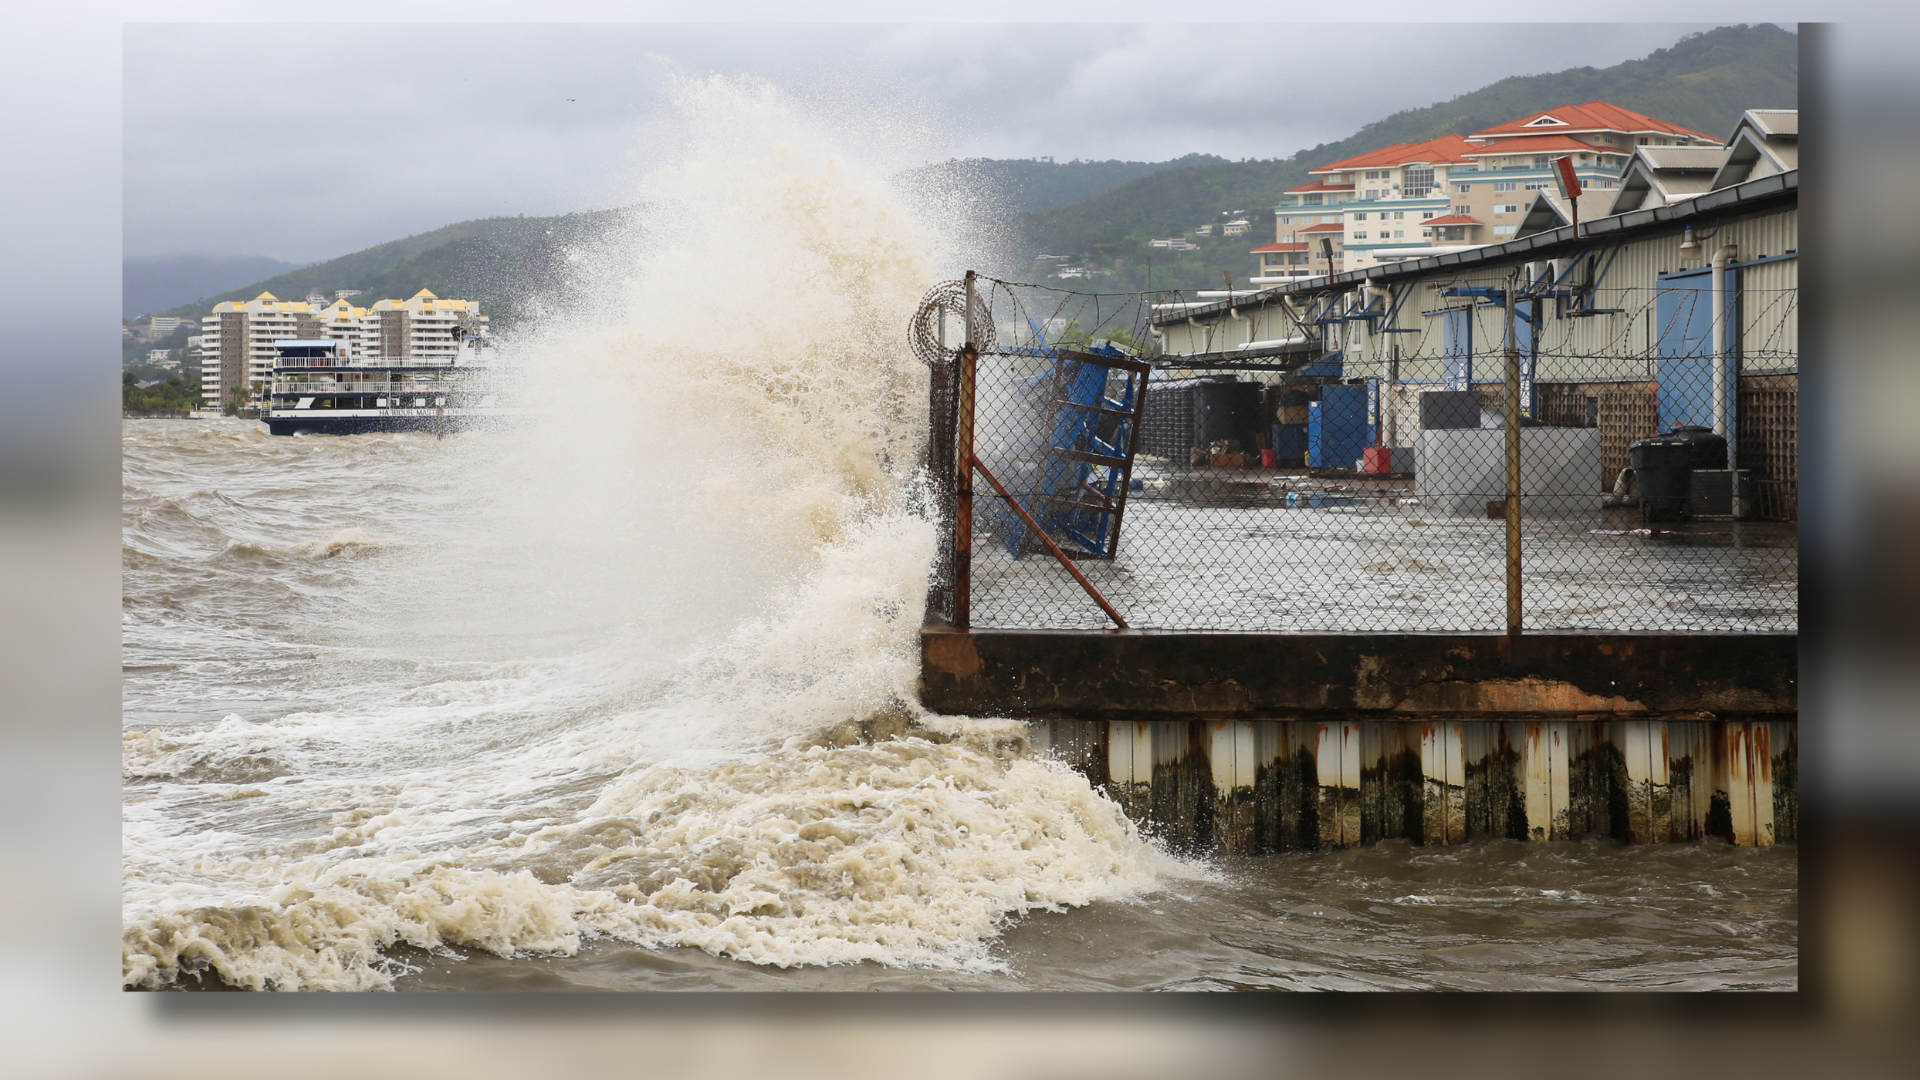 Hurricane Beryl Devastates The Caribbean Islands: What Fueled Such A High-Intensity Storm?